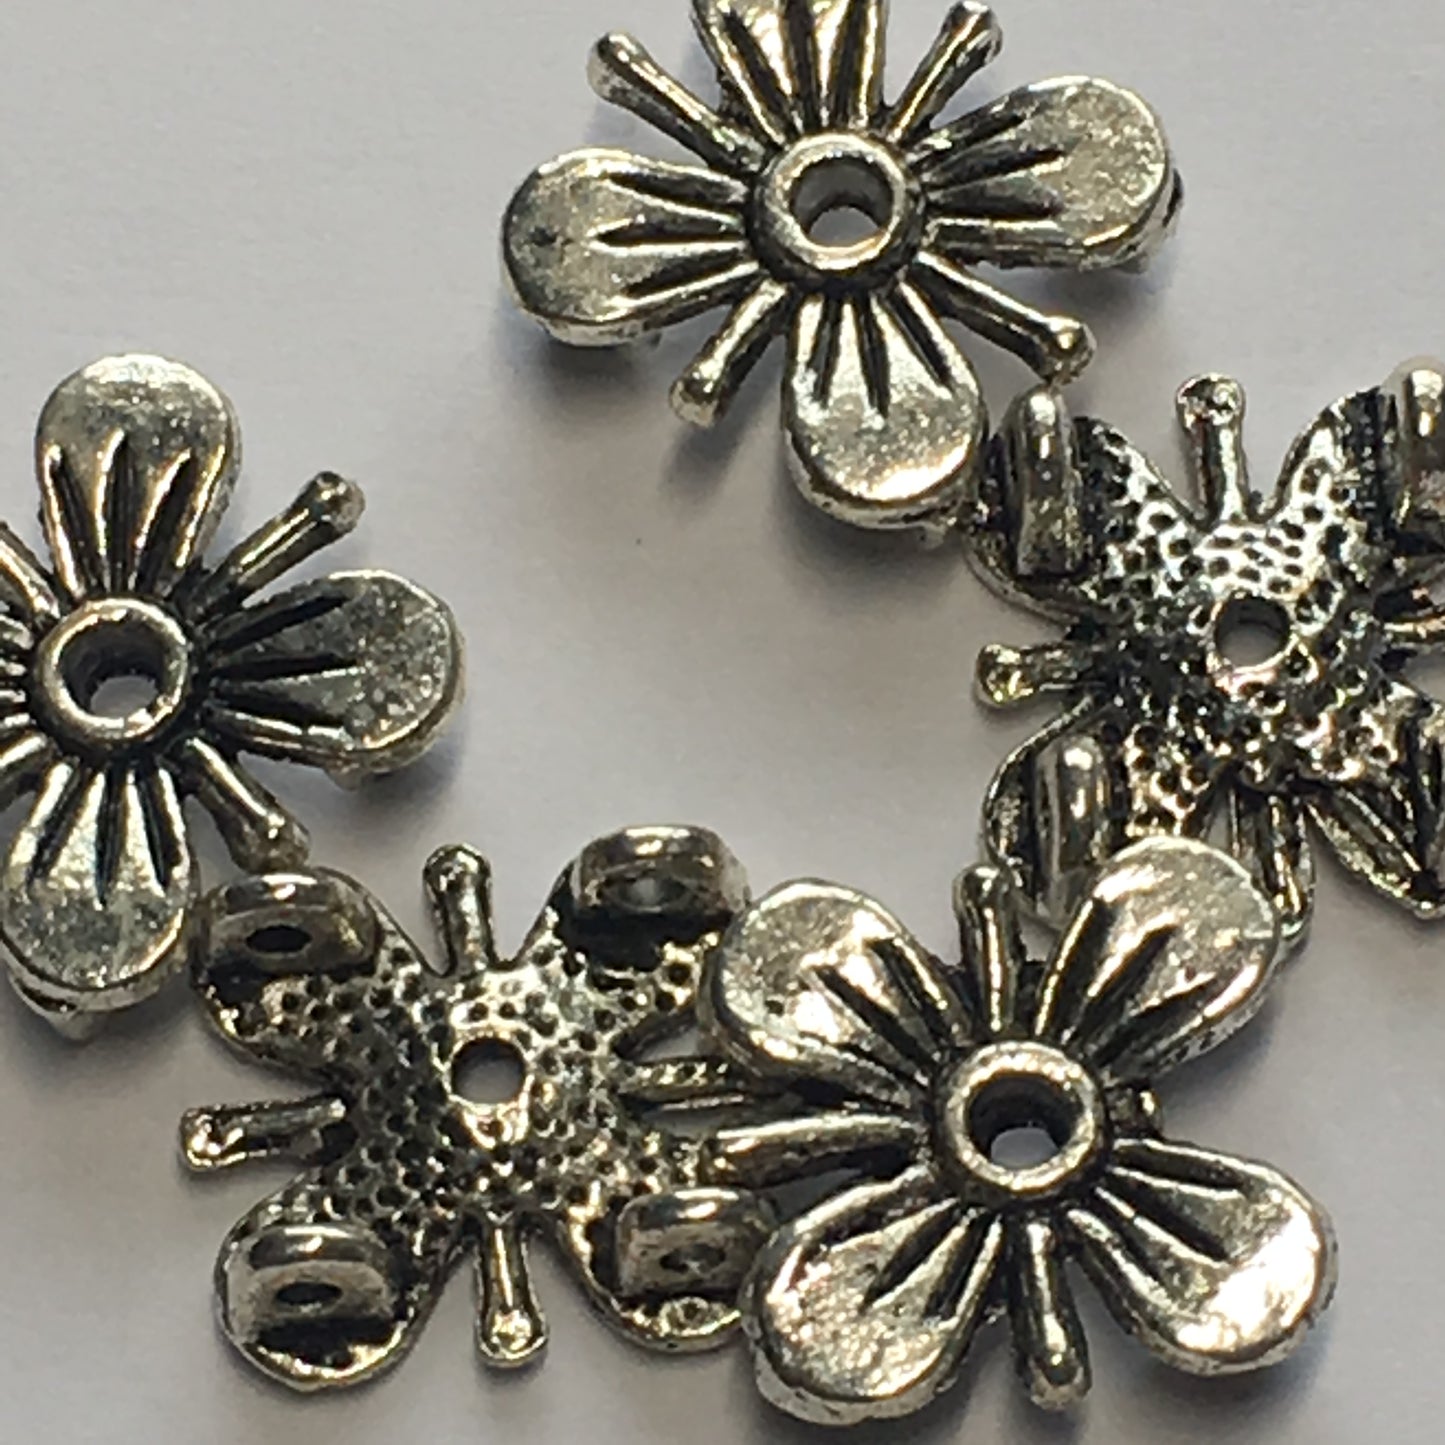 Antique Silver Square Flower 2-Hole Slider Beads, 12 x 12 x 5 mm - 5 Beads